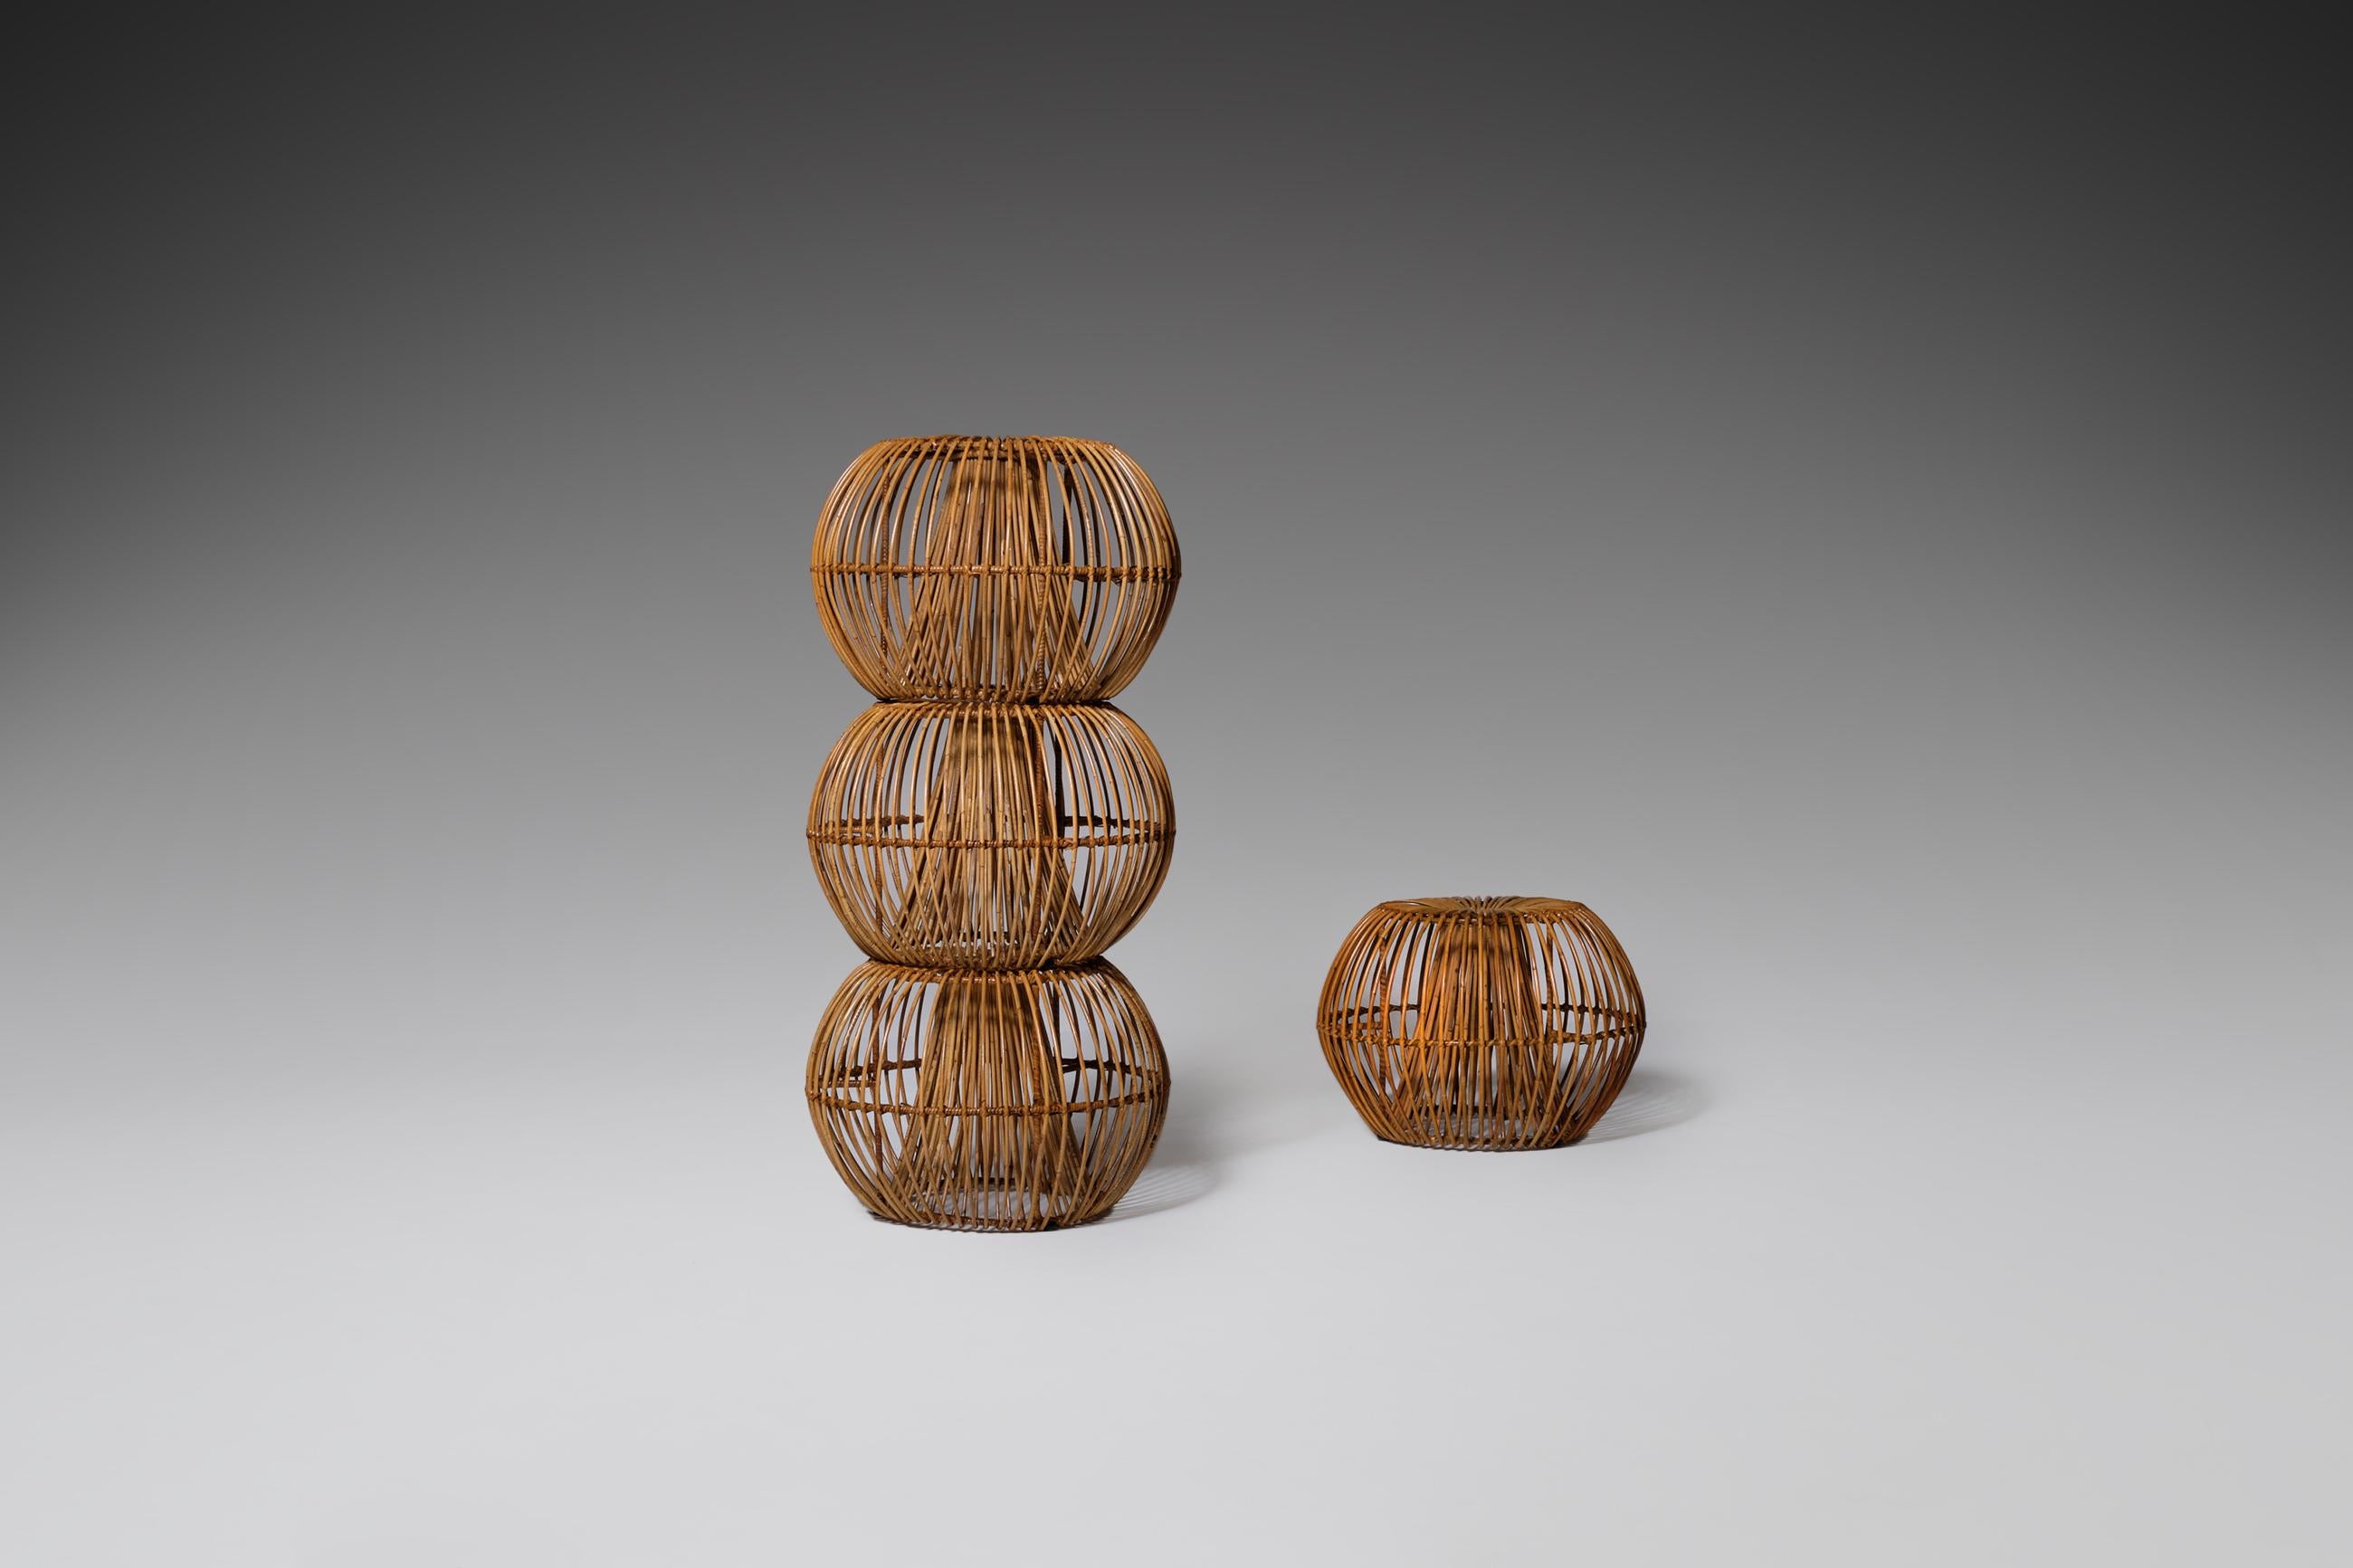 French Janine Abraham & Dirk Jan Rol Rattan Stools for Rougier, France, 1950s